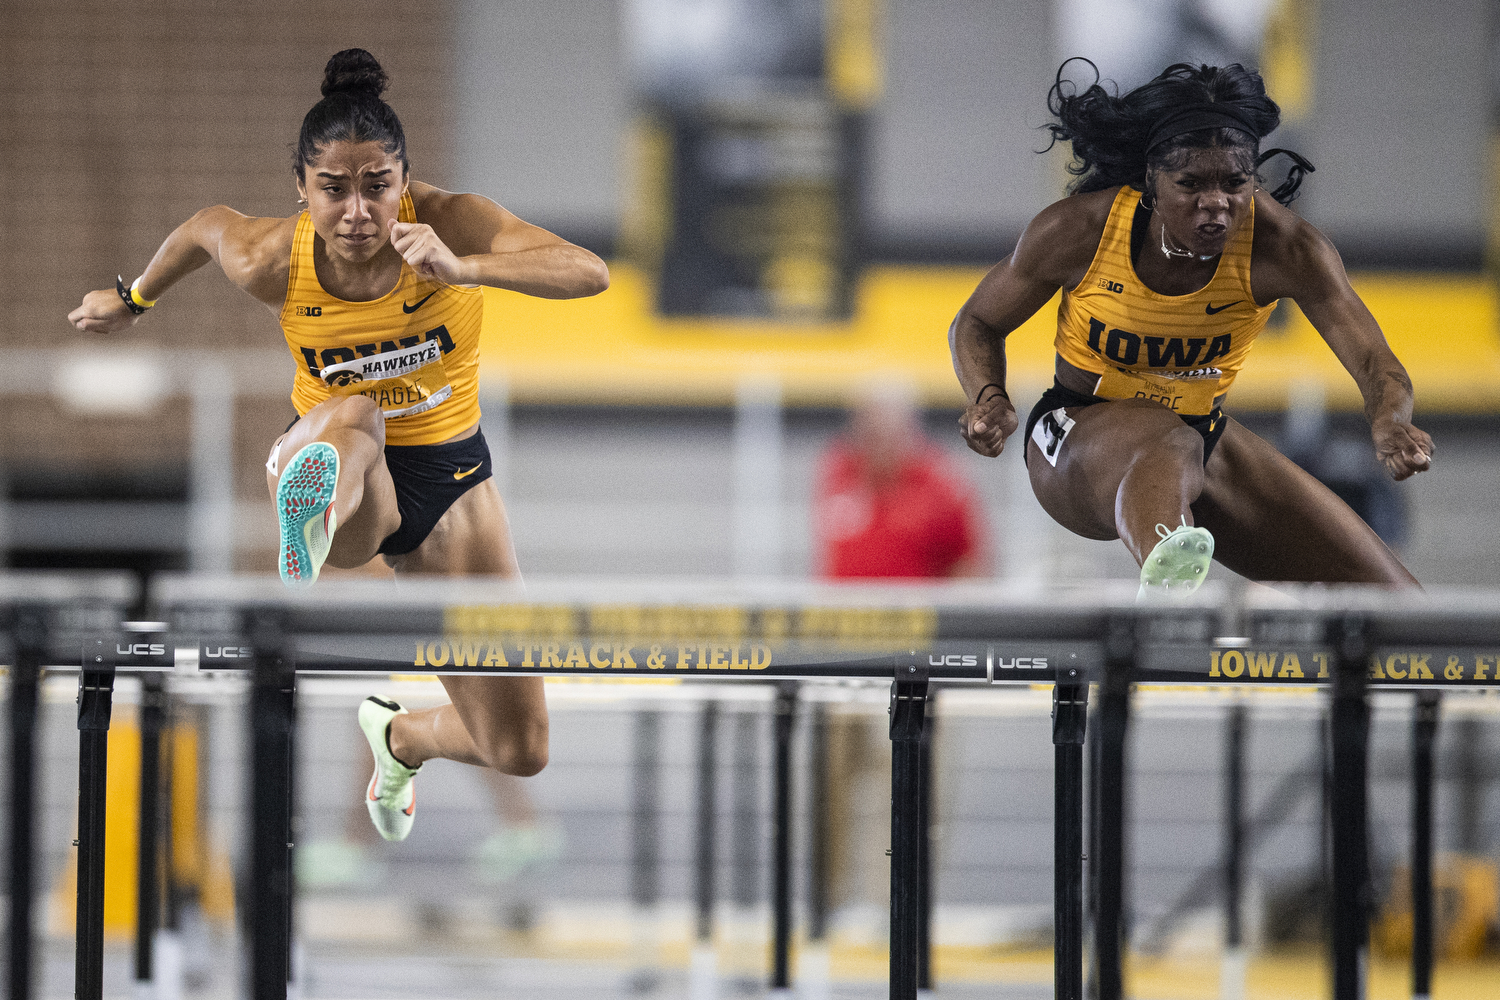 Iowa track and field notebook Hawkeyes hit personal records after